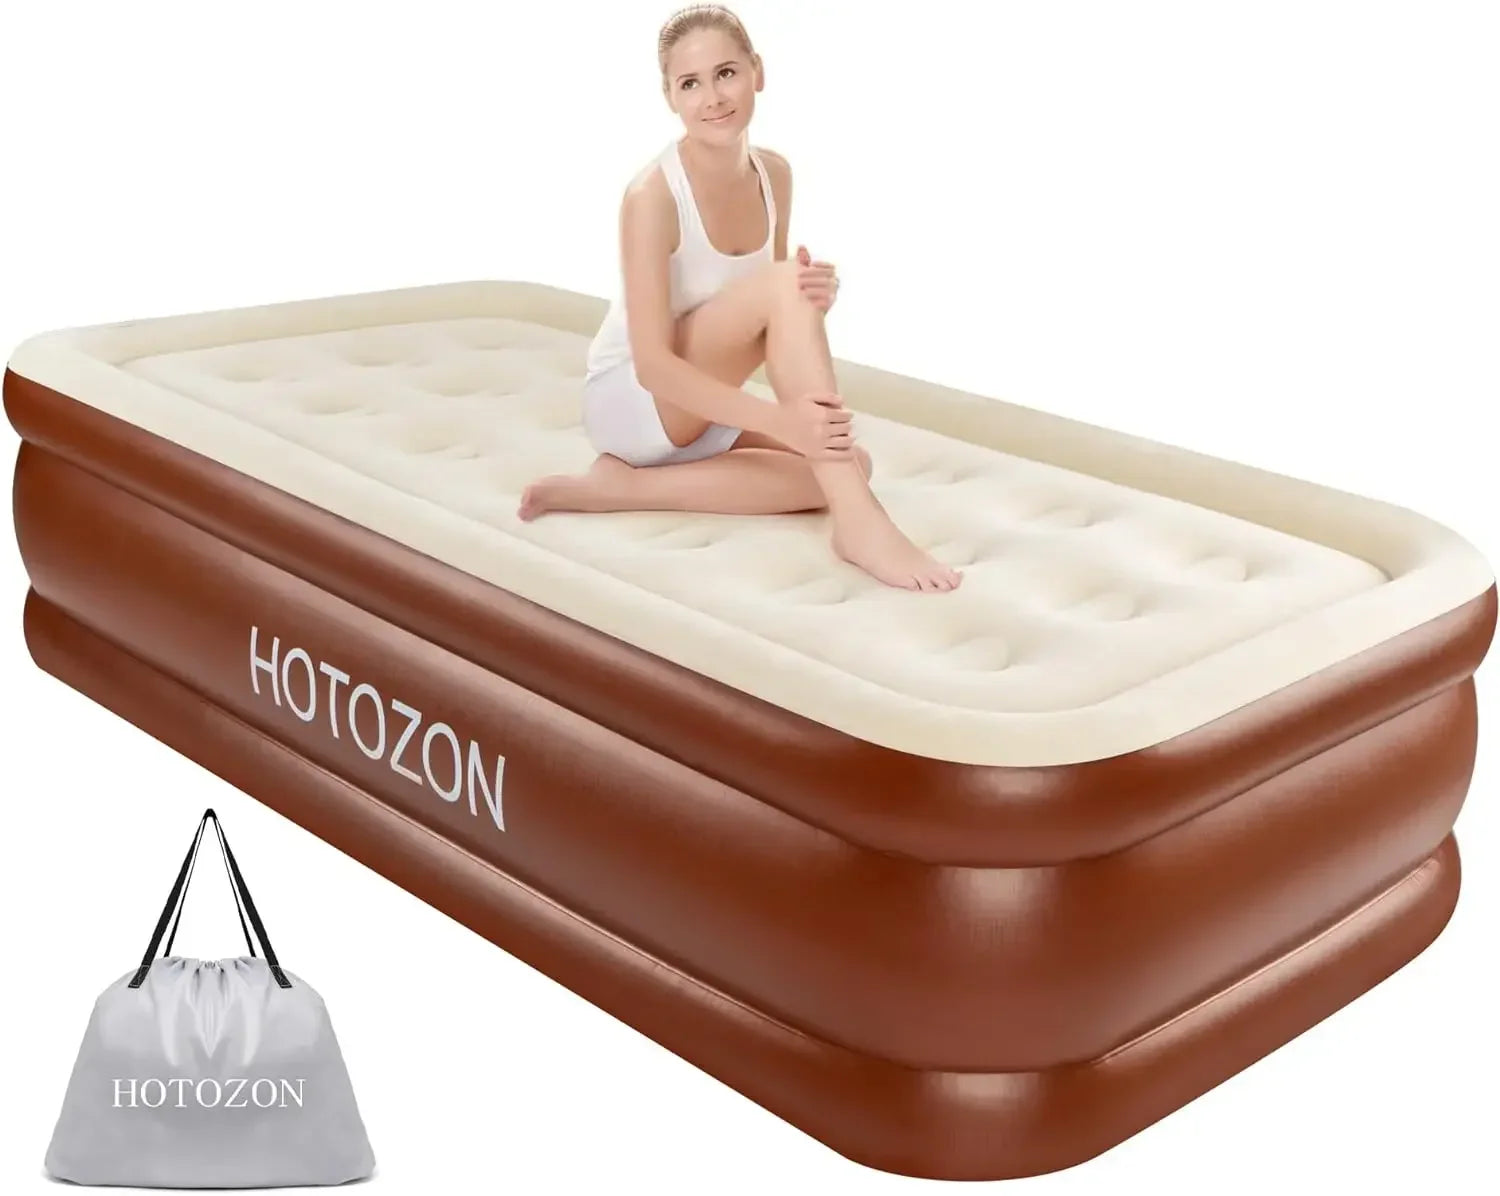 A sleek and durable luxury Queen size inflatable mattress in black color with a built-in electric pump for easy and rapid inflation, standing 18 inches tall with dimensions of 80"L x 60"W. Ensures maximum comfort with a puncture-resistant design and total weight limit of 660 pounds, suitable for all body types and sleeping positions. Package includes a user manual, a genuine repair patch, and a pump, making it an ideal sleeping essential for use anywhere from home to camping.